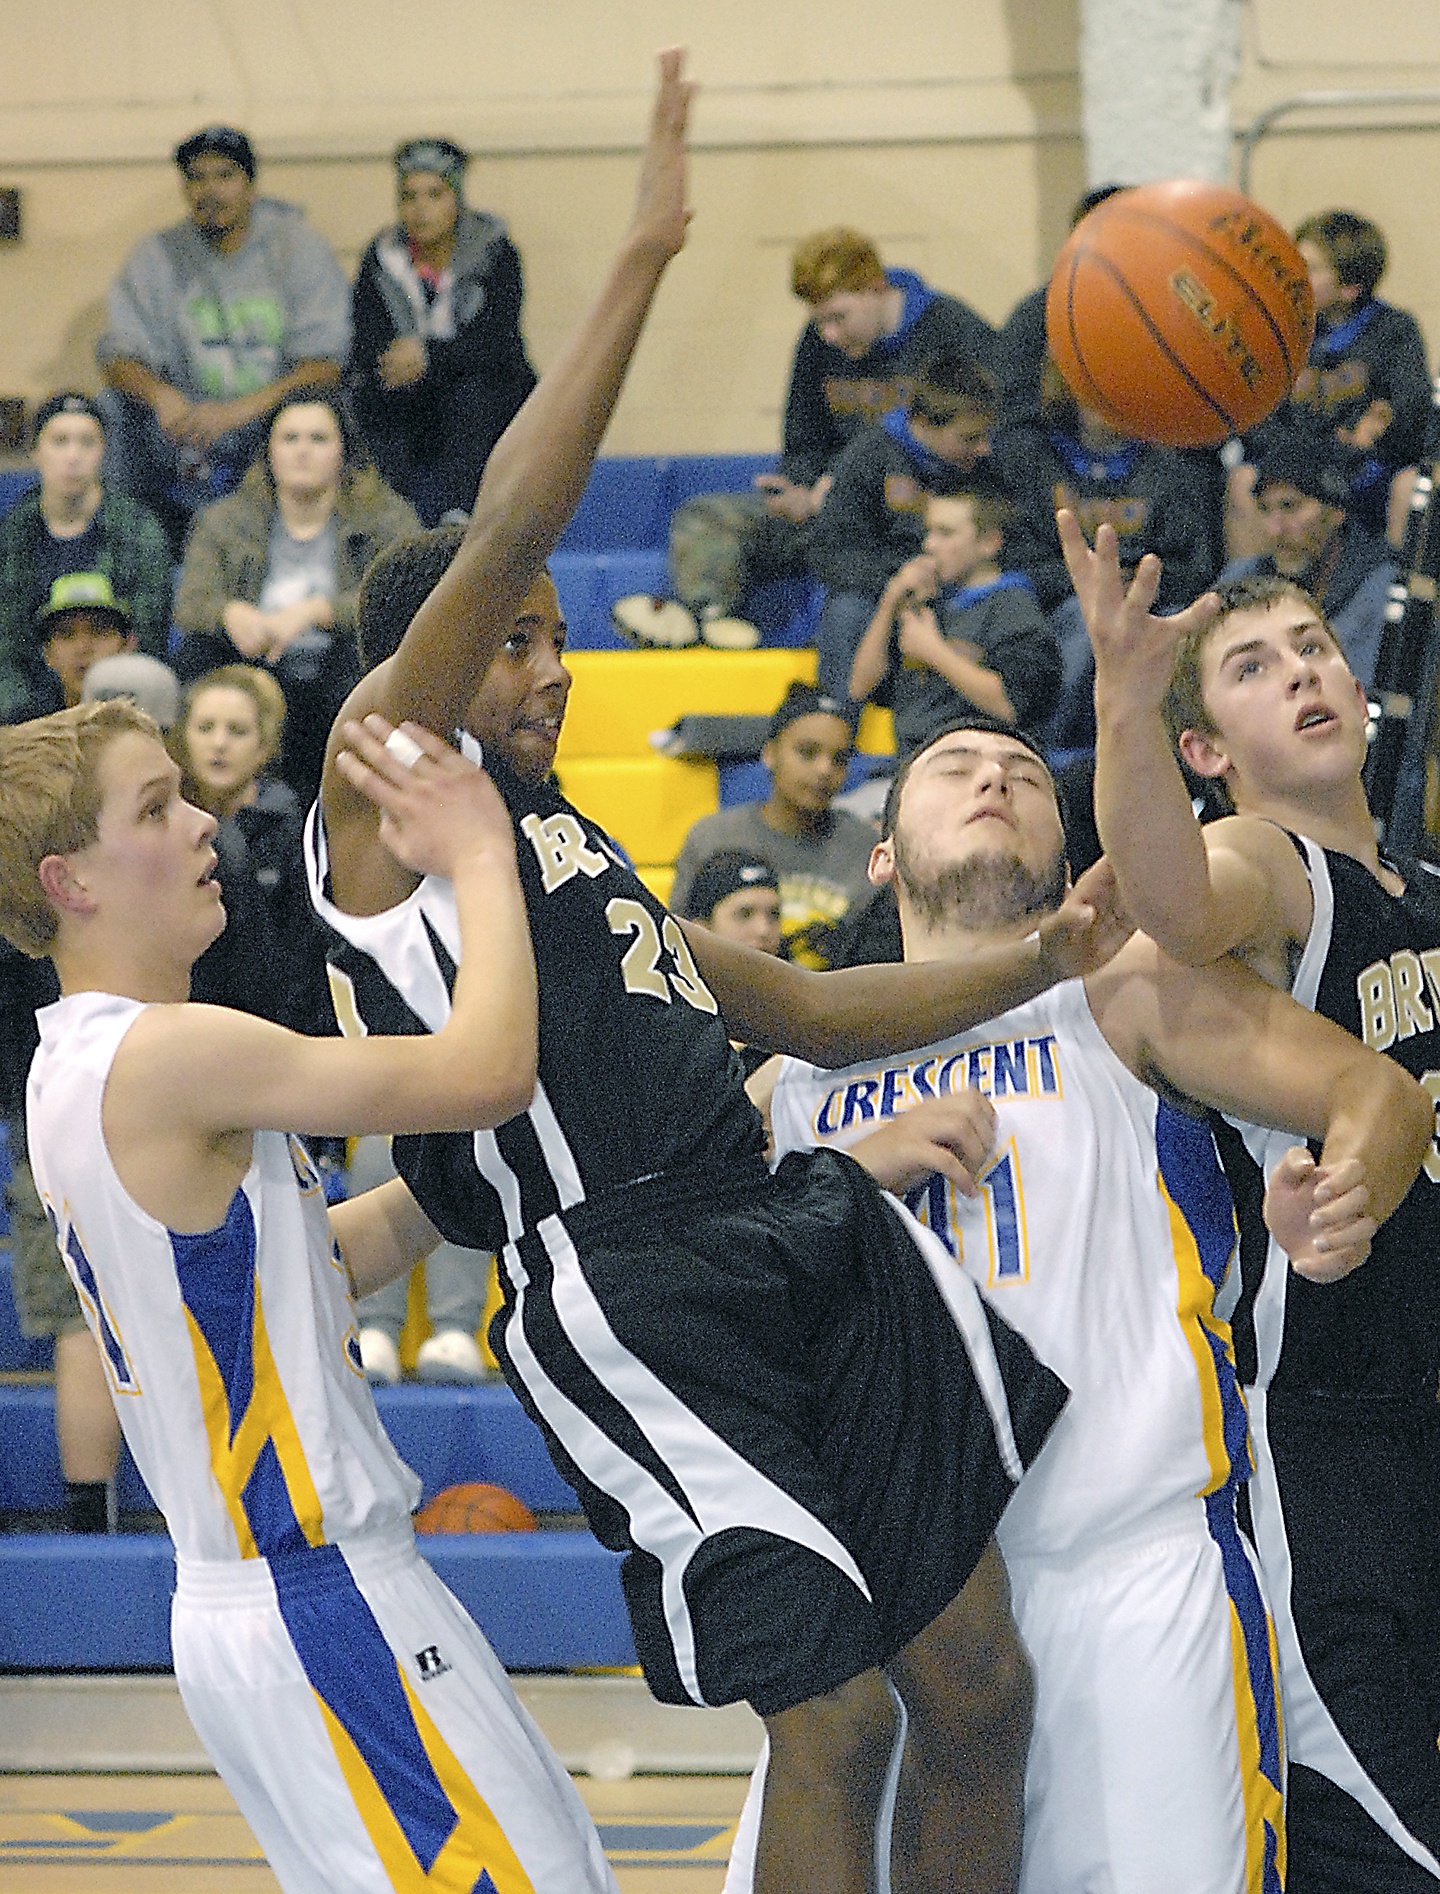 Keith Thorpe/Peninsula Daily News                                In a scramble under the hoop, from left to right, Peter Johnson of Crescent, Jamari Signor of Clallam Bay, Wyatt McNeece of Crescent and Ryan McCoy of Clallam Bay fight for a rebound.                                Keith Thorpe/Peninsula Daily News In a scramble under the hoop, Peter Johnson of Crescent, Jamari Signor of Clallam Bay, Wyatt McNeece of Crescent and Ryan McCoy of Clallam Bay fight for a rebound in the second quarter on friday at Crescent High School in Joyce.